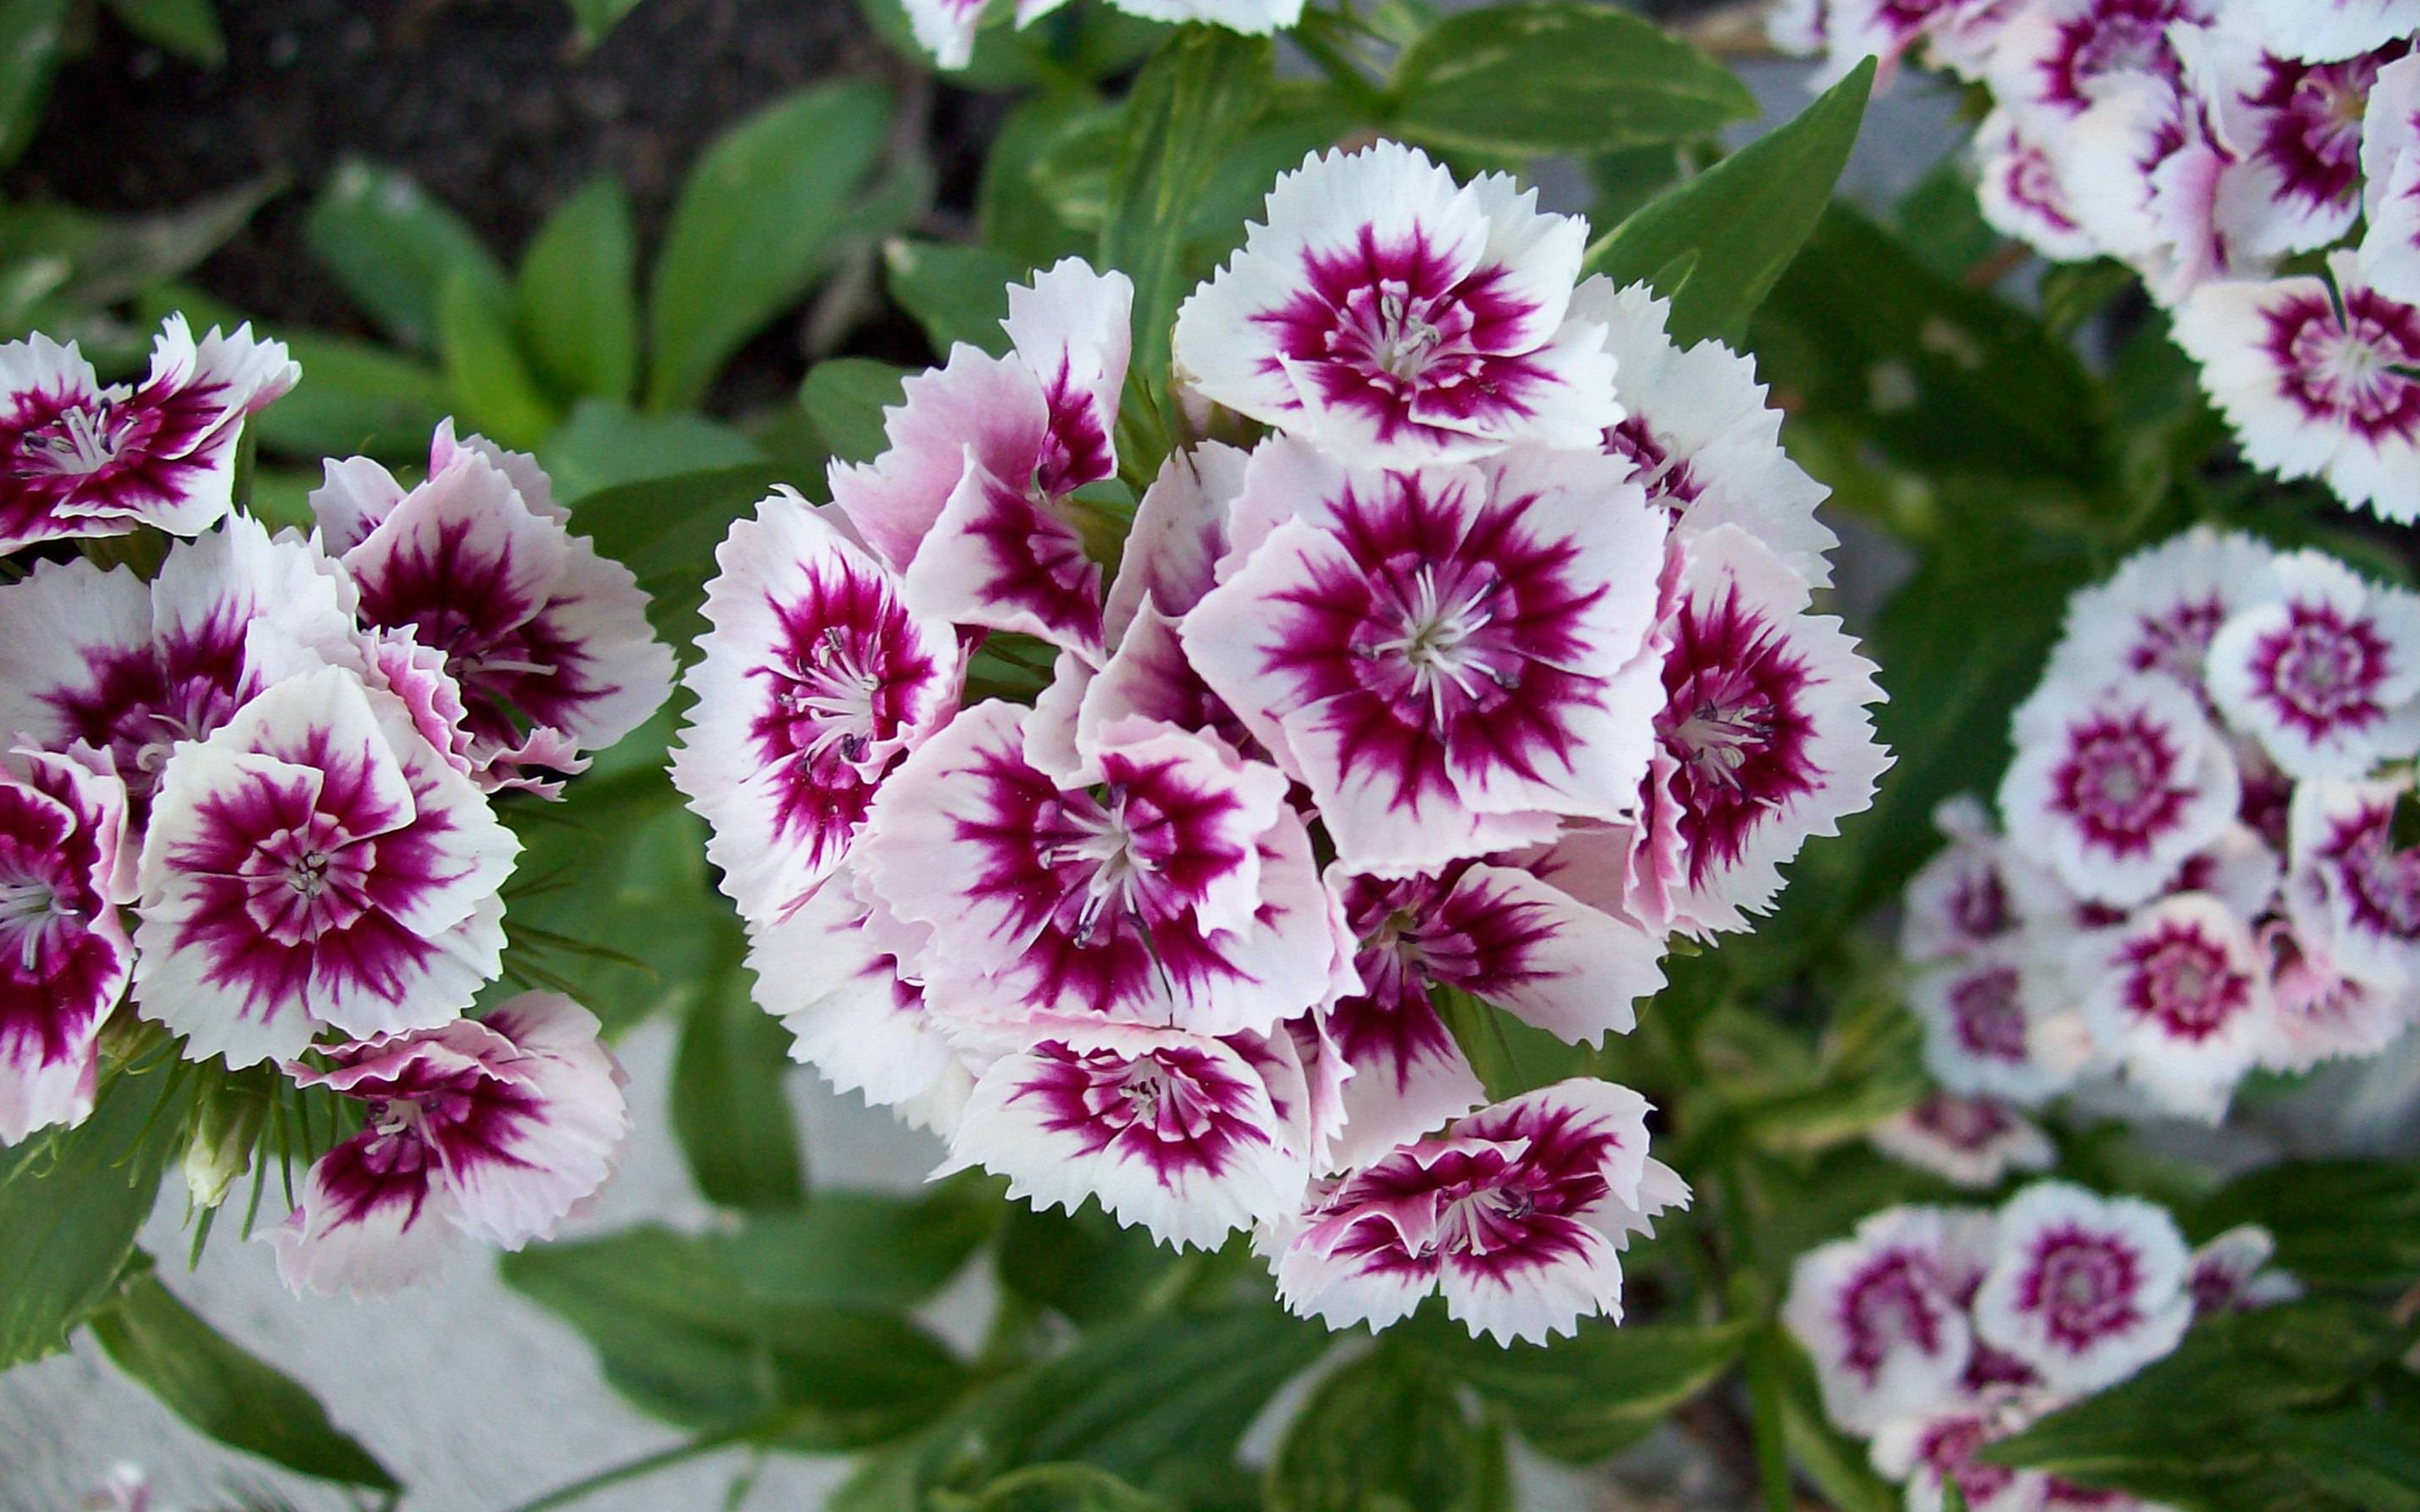 Plants Sweet William Spring Flowers Purple Petals With White Edges